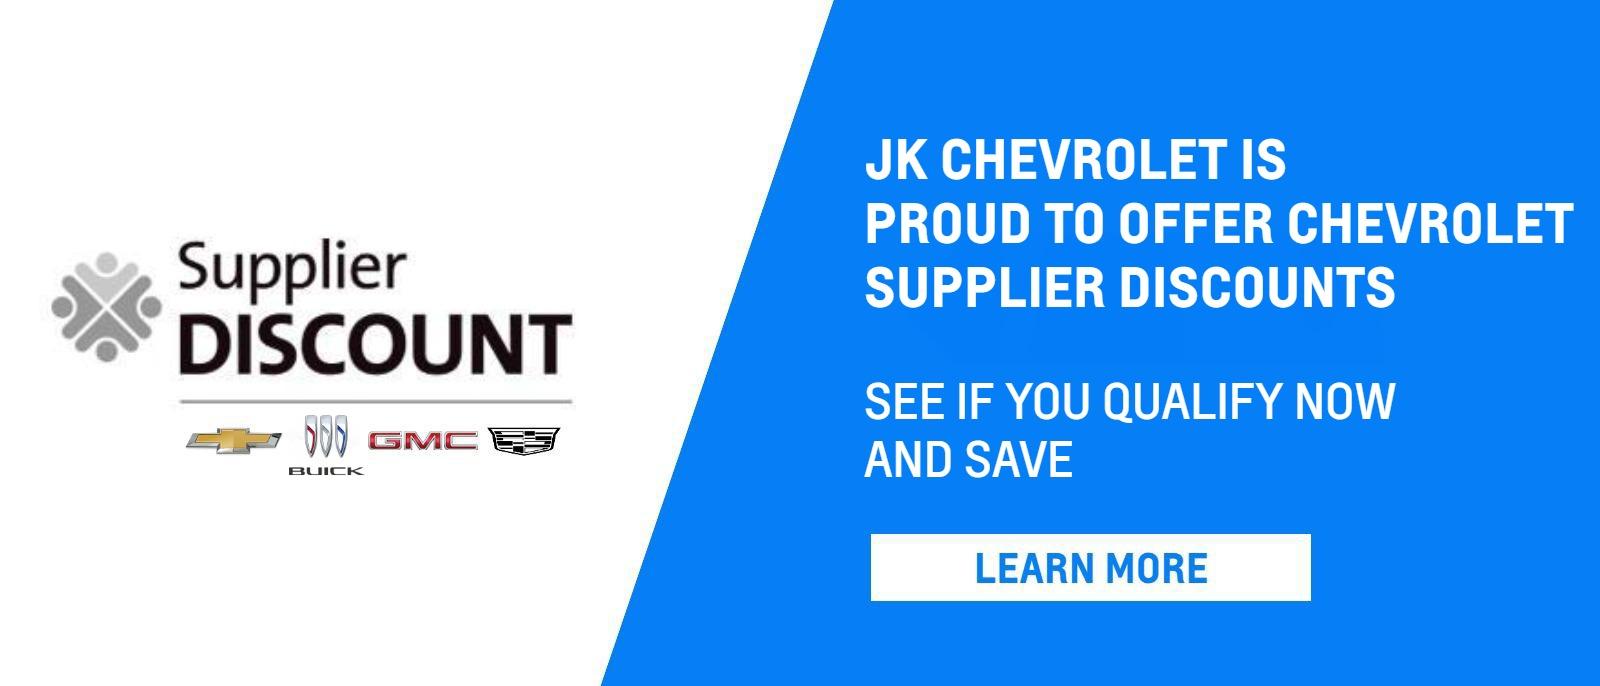 SUPPLIER DISCOUNT
JK CHEVROLET IS PROUD TO OFFER CHEVROLET SUPPLIER DISCOUNTS
SEE IF YOU QUALIFY NOW AND SAVE